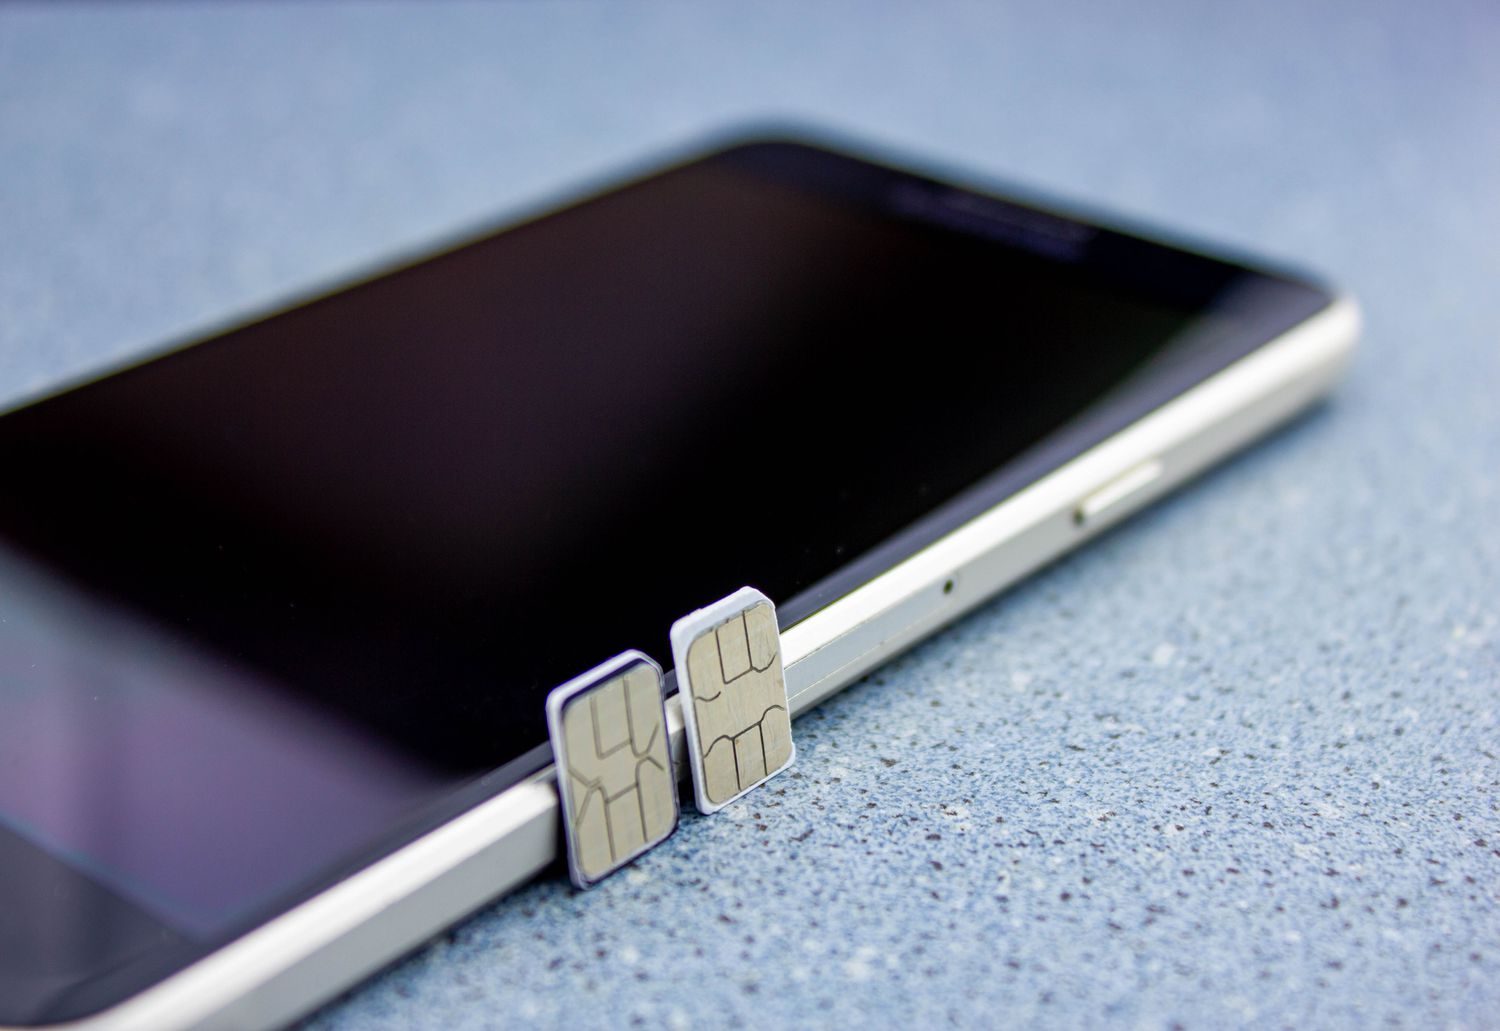 Understanding The Numbers On Your SIM Card